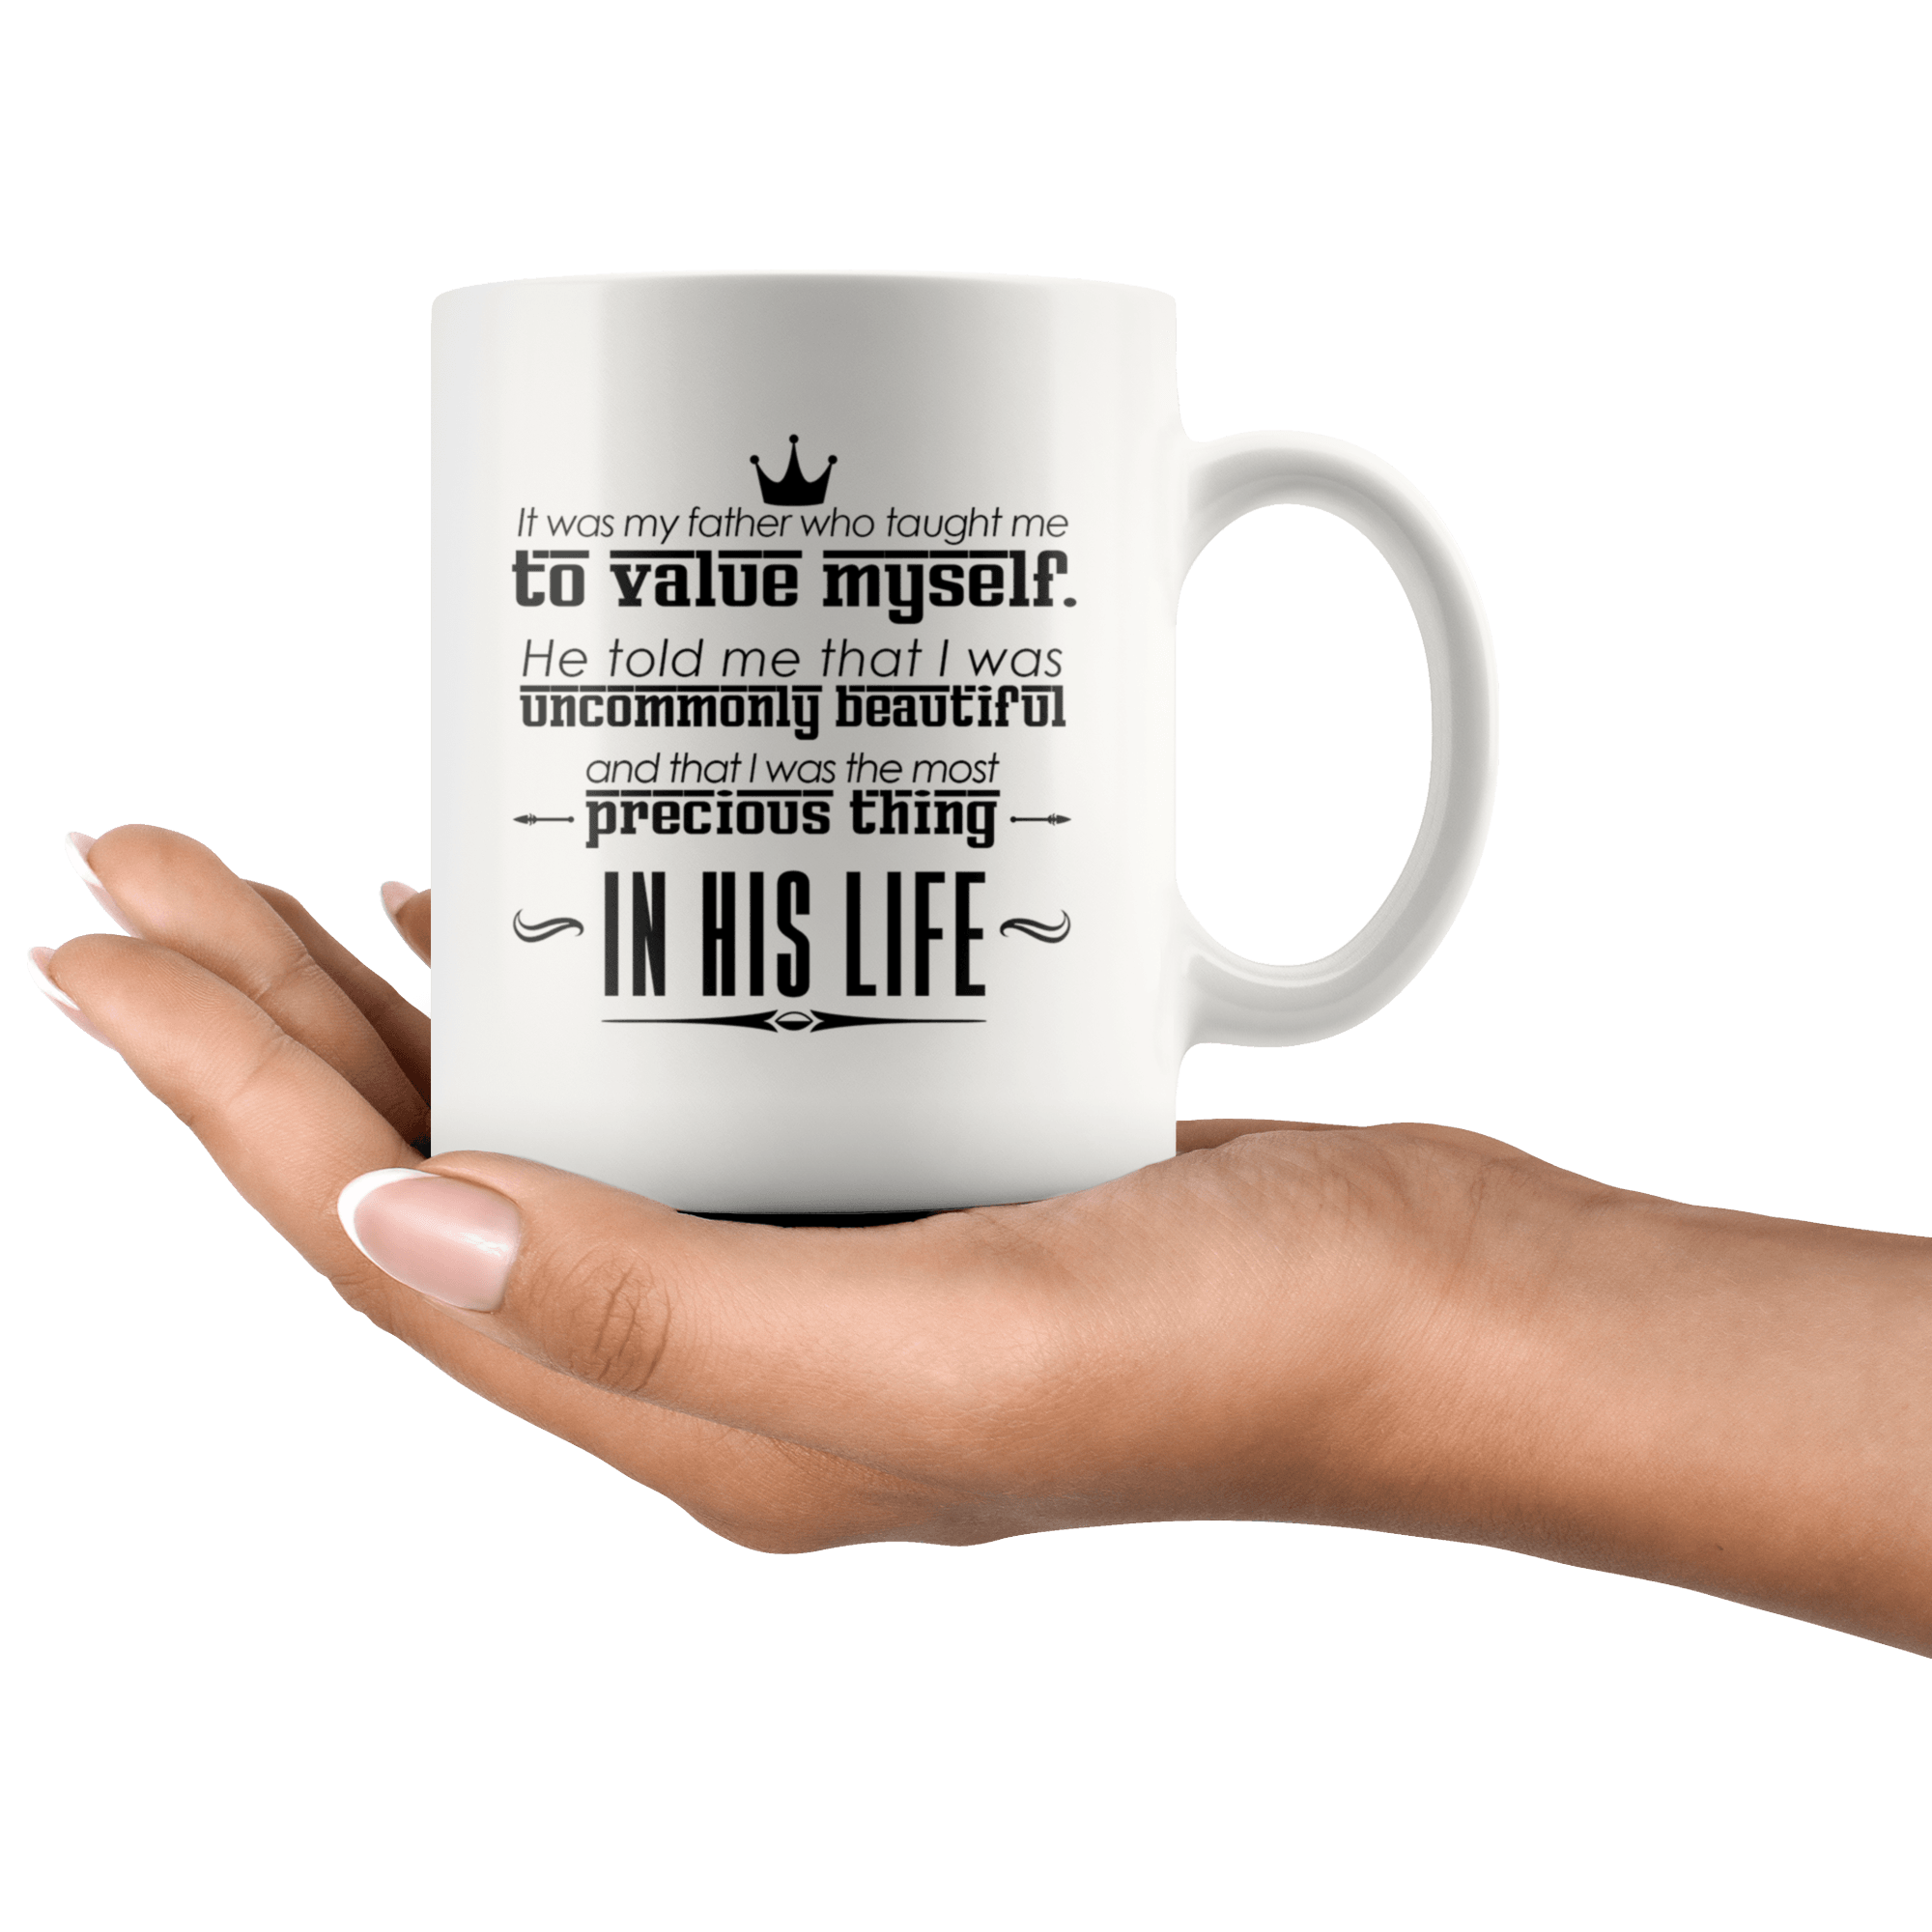 Great Coffee Mug For Father - It Was My Father Who Taught Me To Value Myself - SPCM